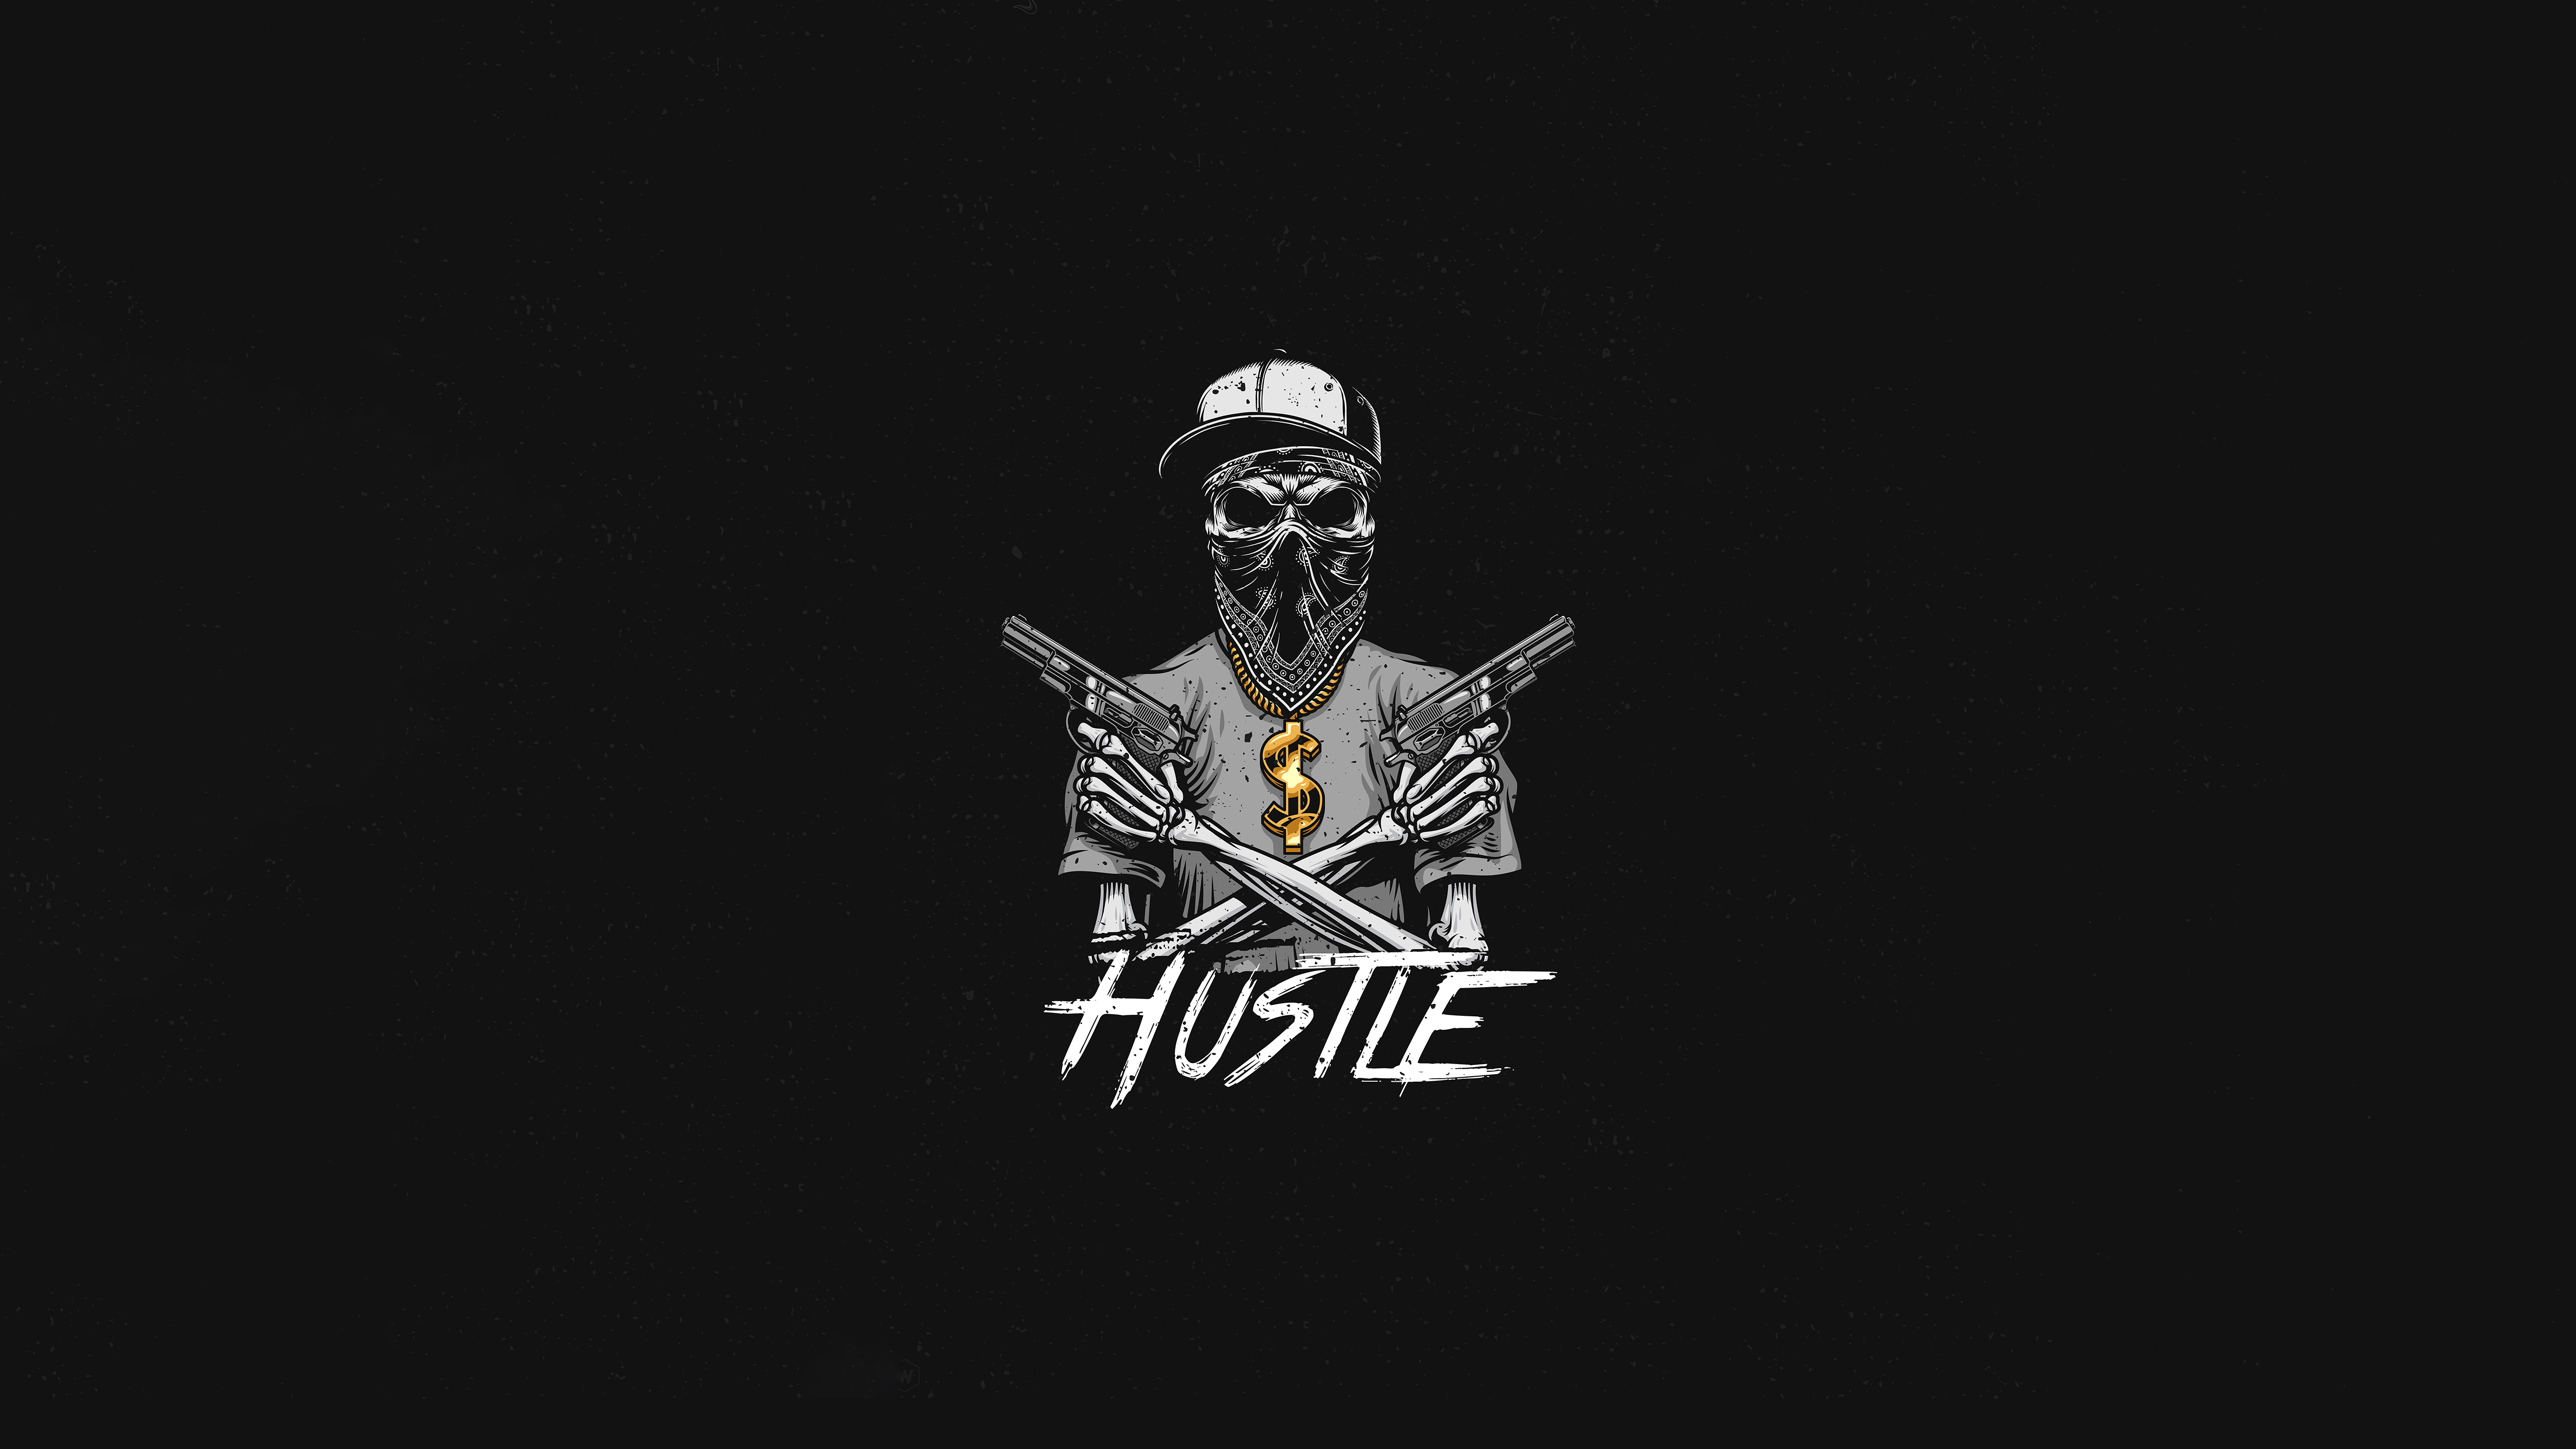 Hustle wallpaper by mufc0788  Download on ZEDGE  a25b